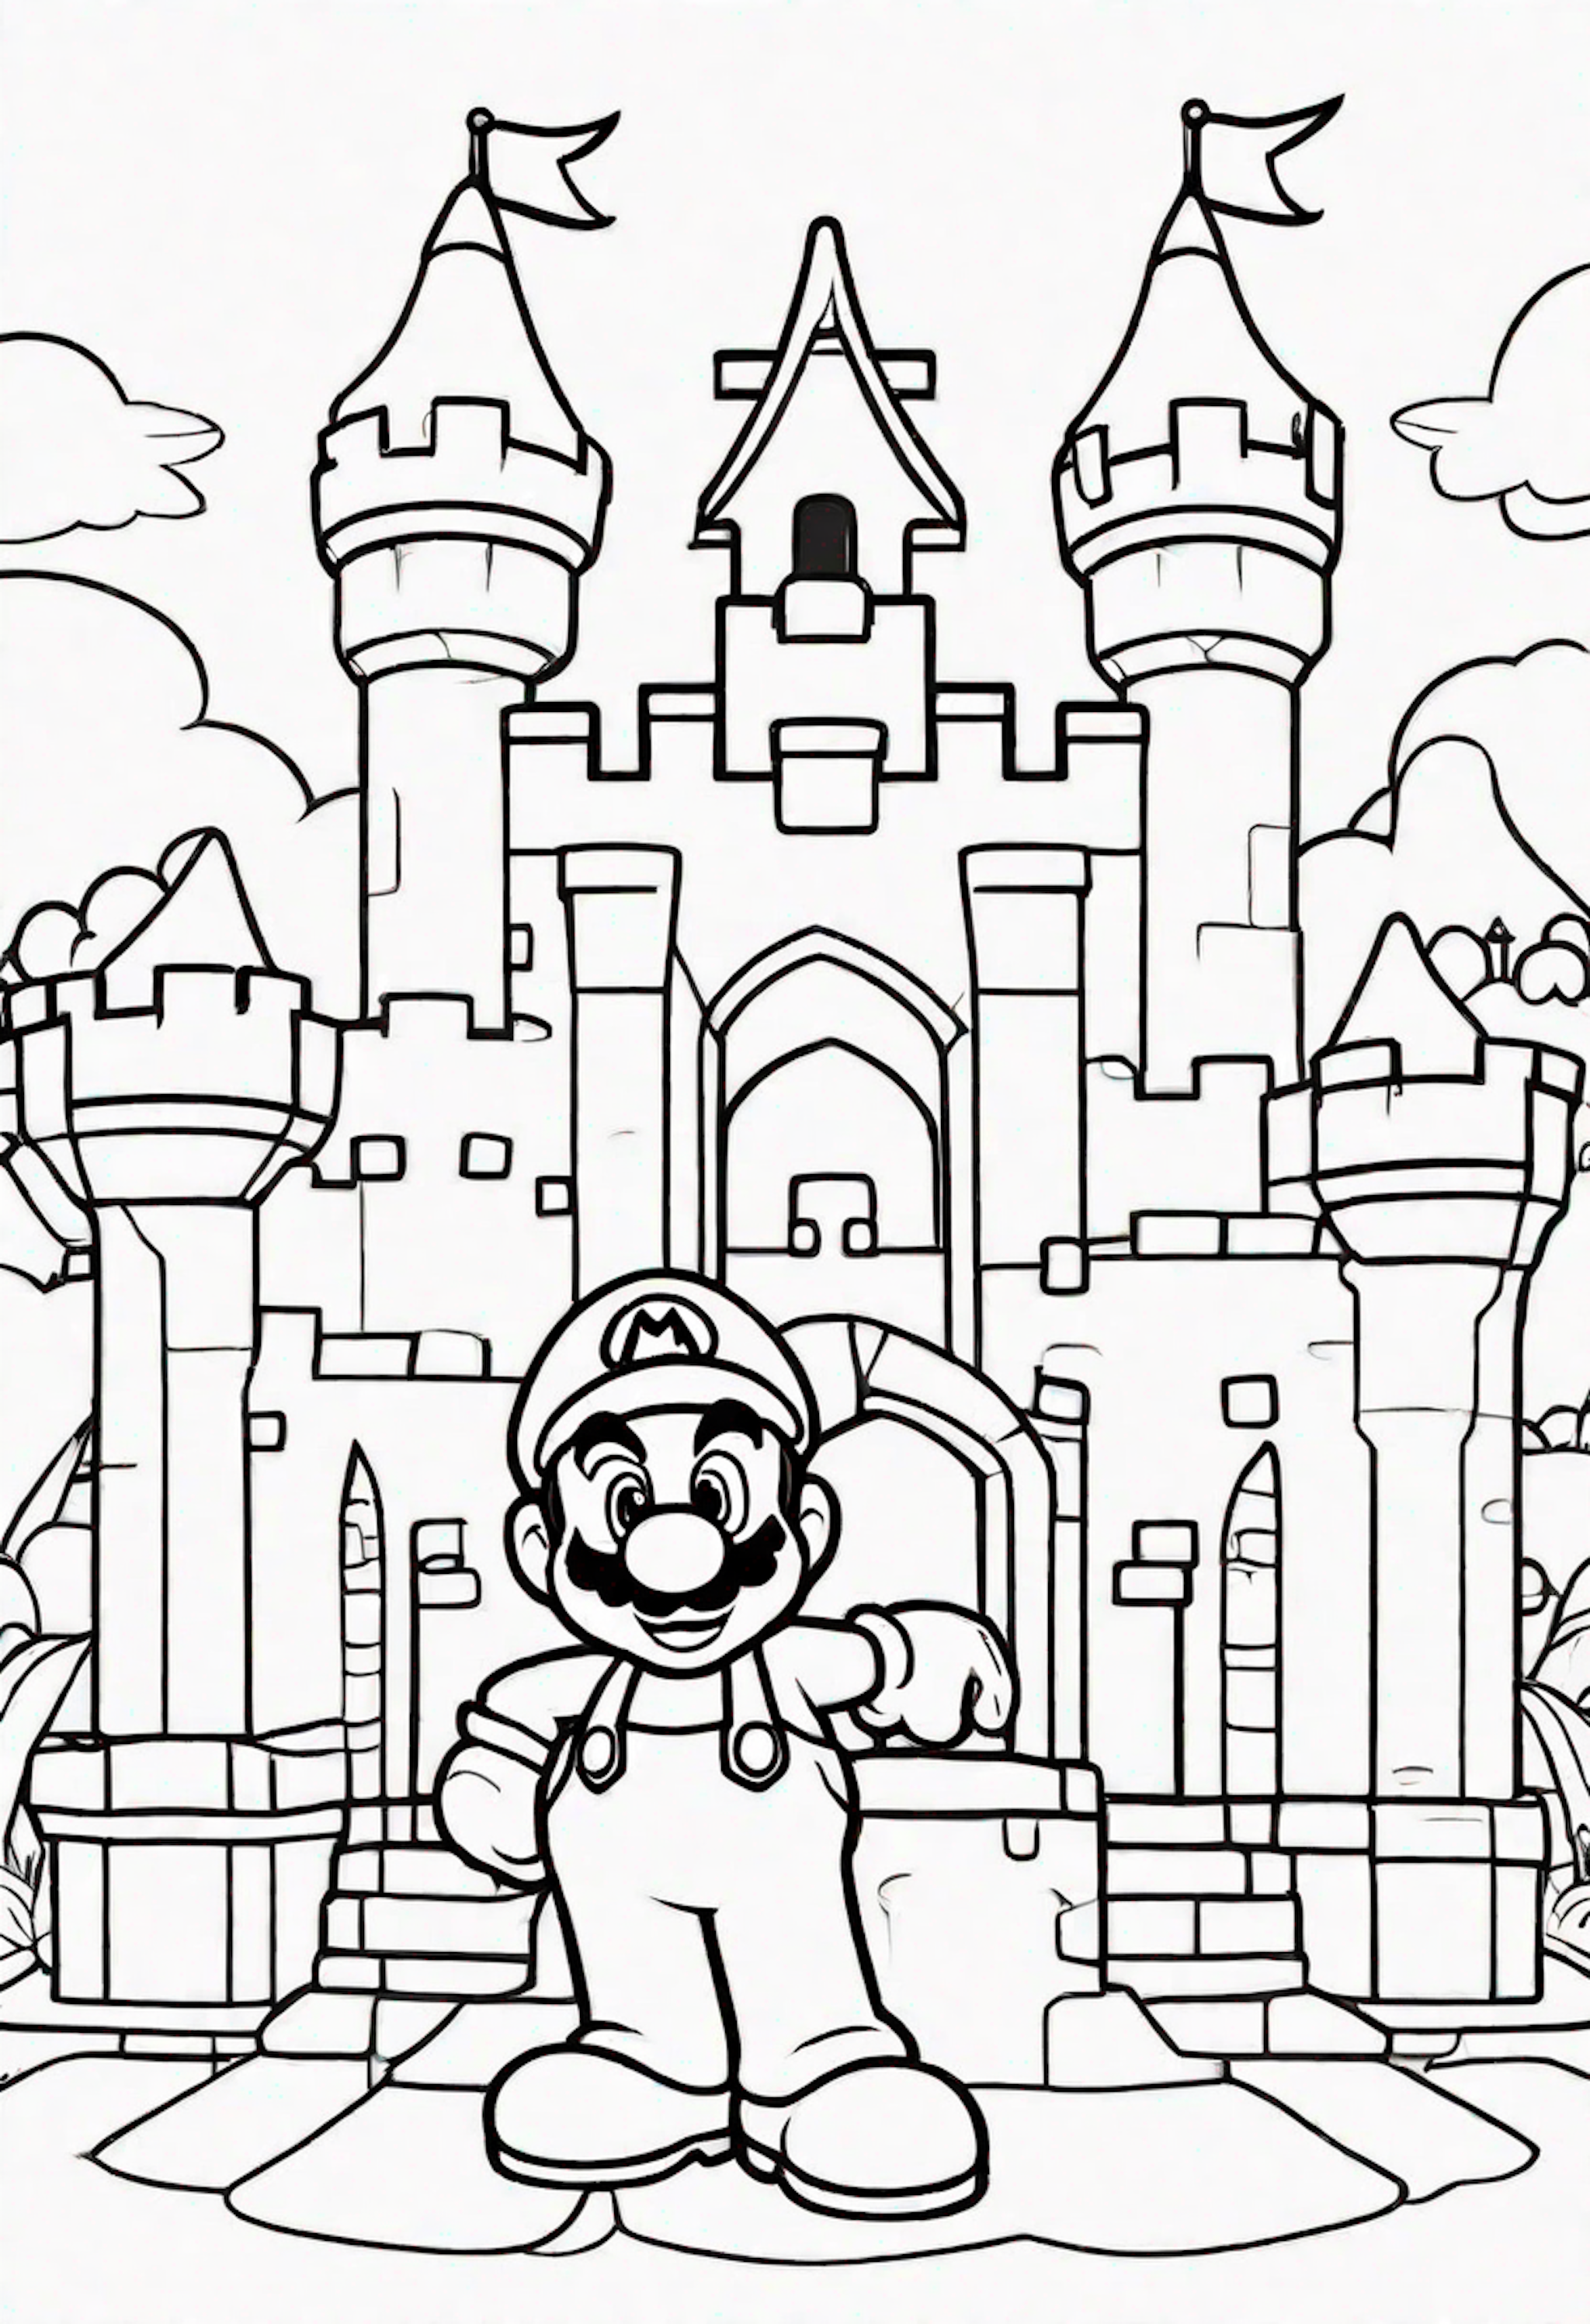 A coloring page for 2 Mario coloring pages